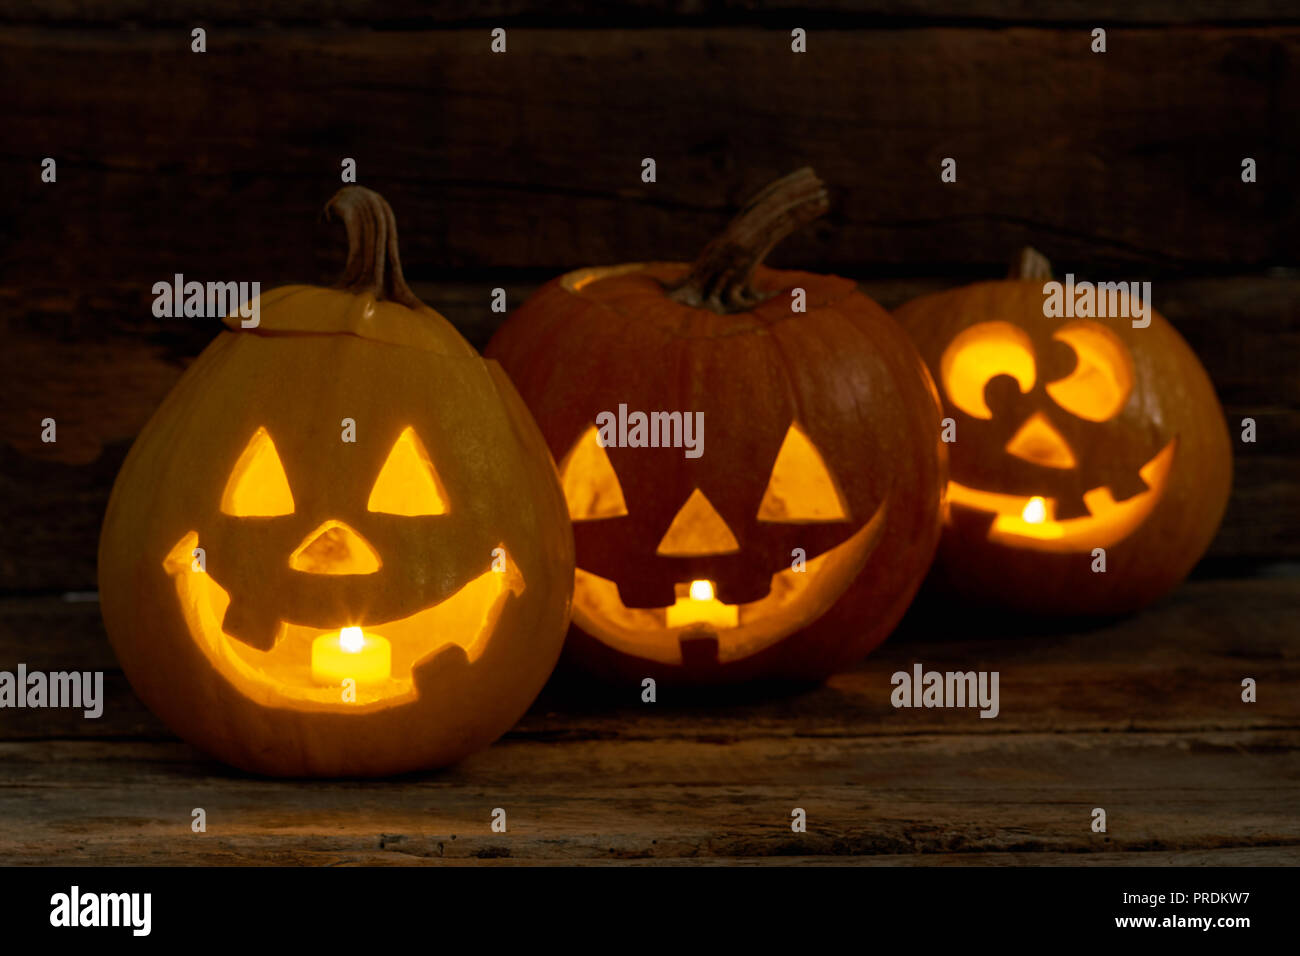 Funny Halloween pumpkins with burning candles. Stock Photo